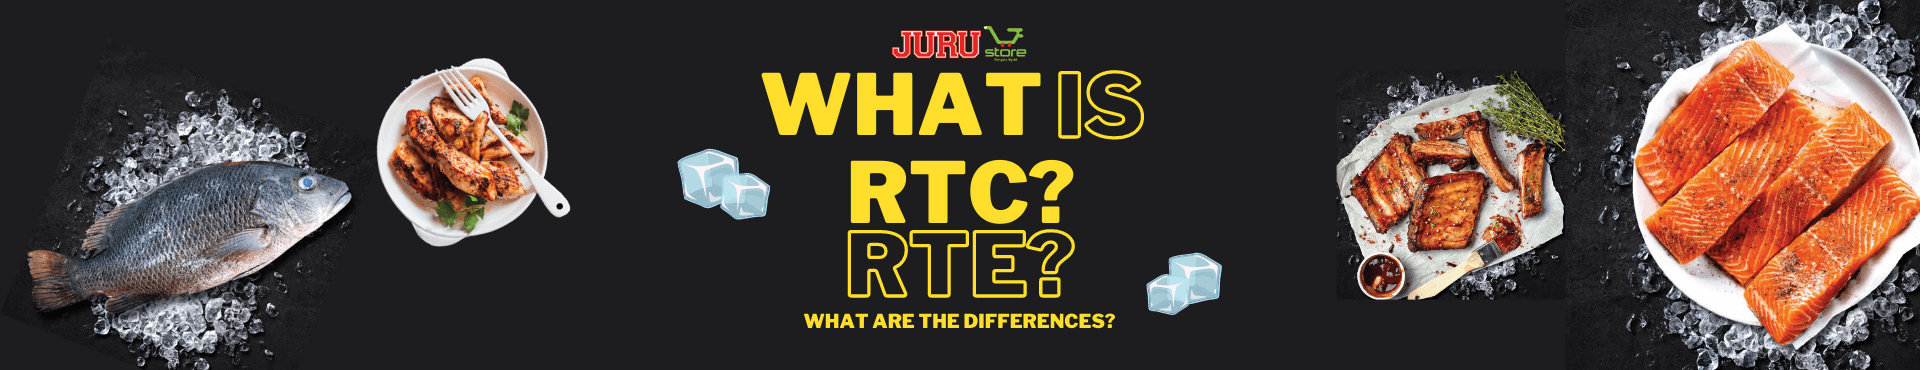 RTC food? RTE food? What are the differences?